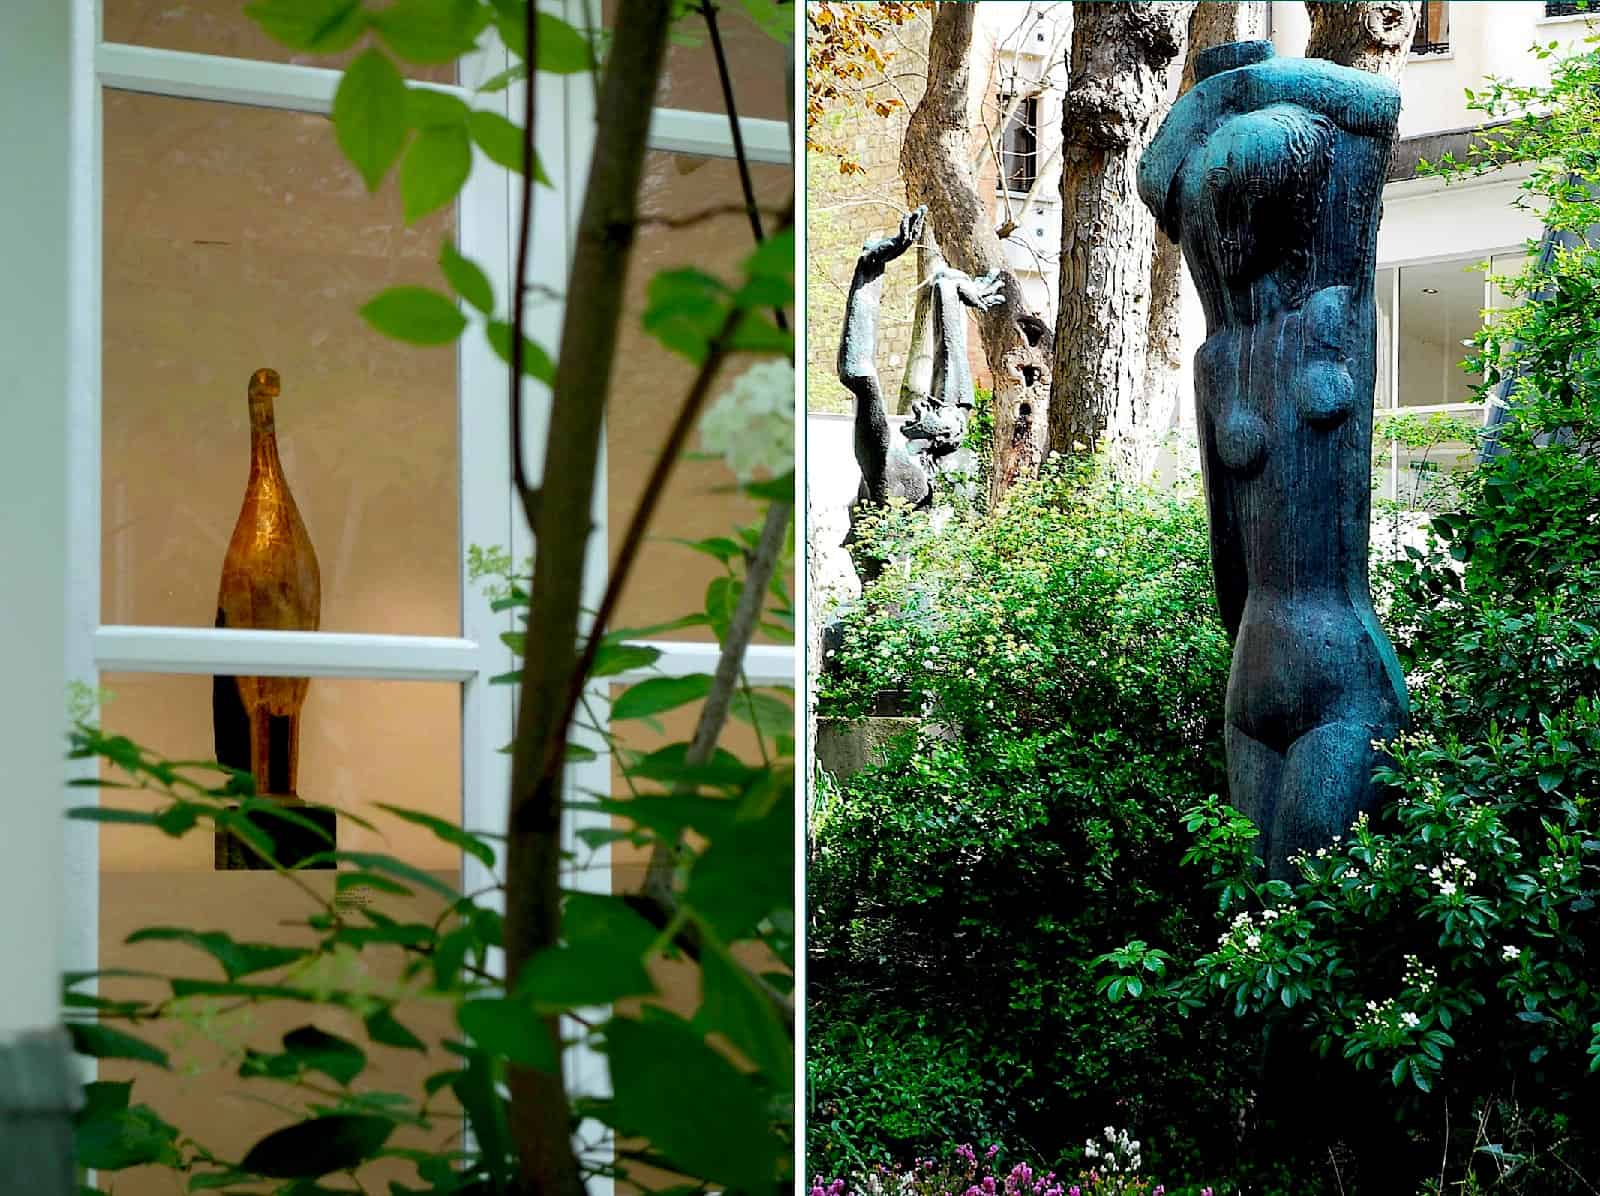 Off the beaten path museums in Paris: Musee Cluny, Musee de quai Branly, Musee Zadkine, and more